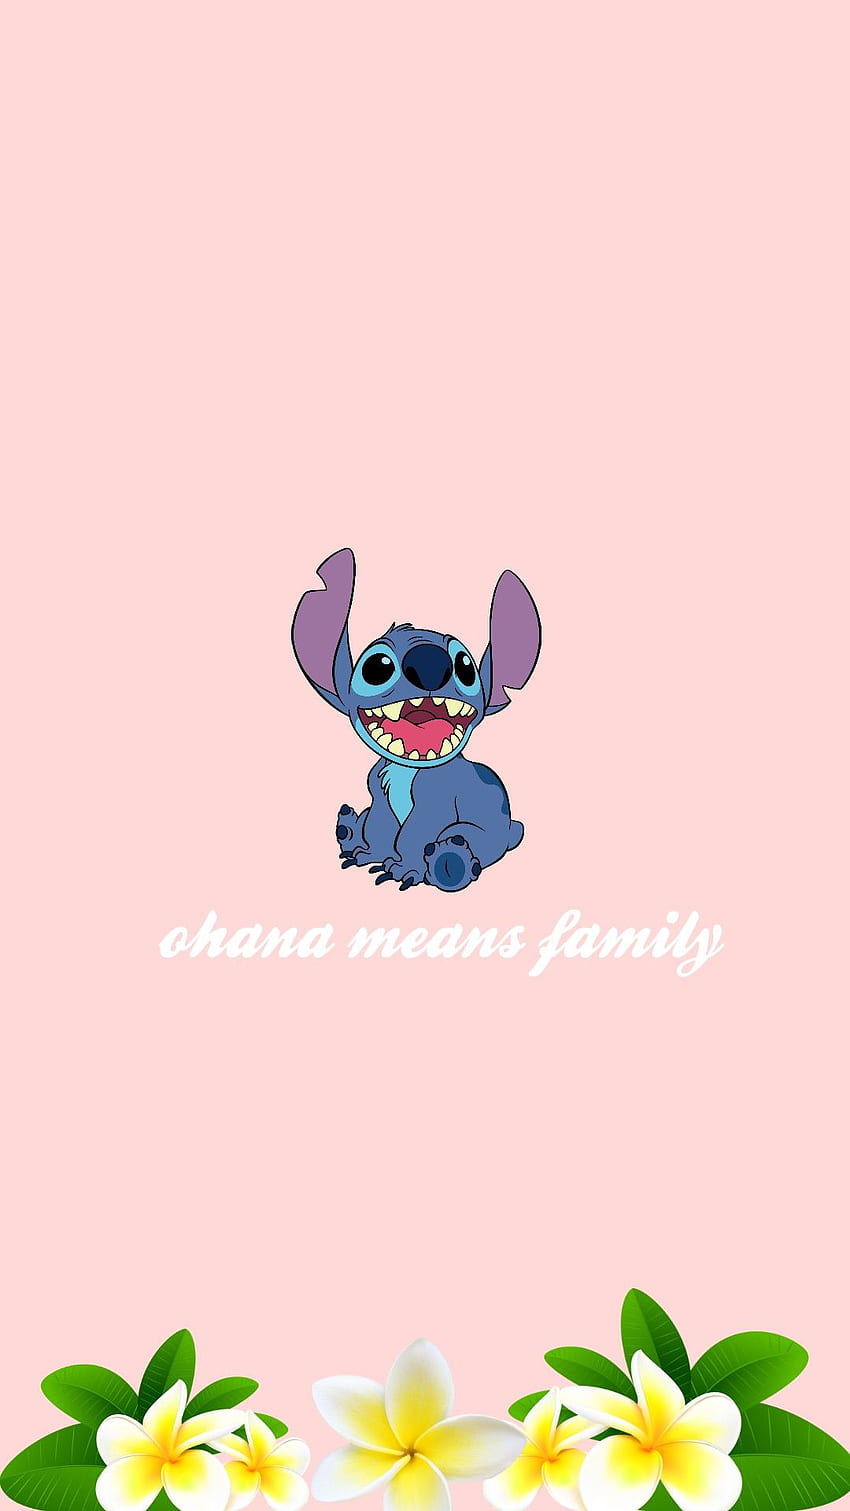 50 Adorable Stitch Wallpapers  Wonder Stitch  Idea Wallpapers  iPhone  WallpapersColor Schemes